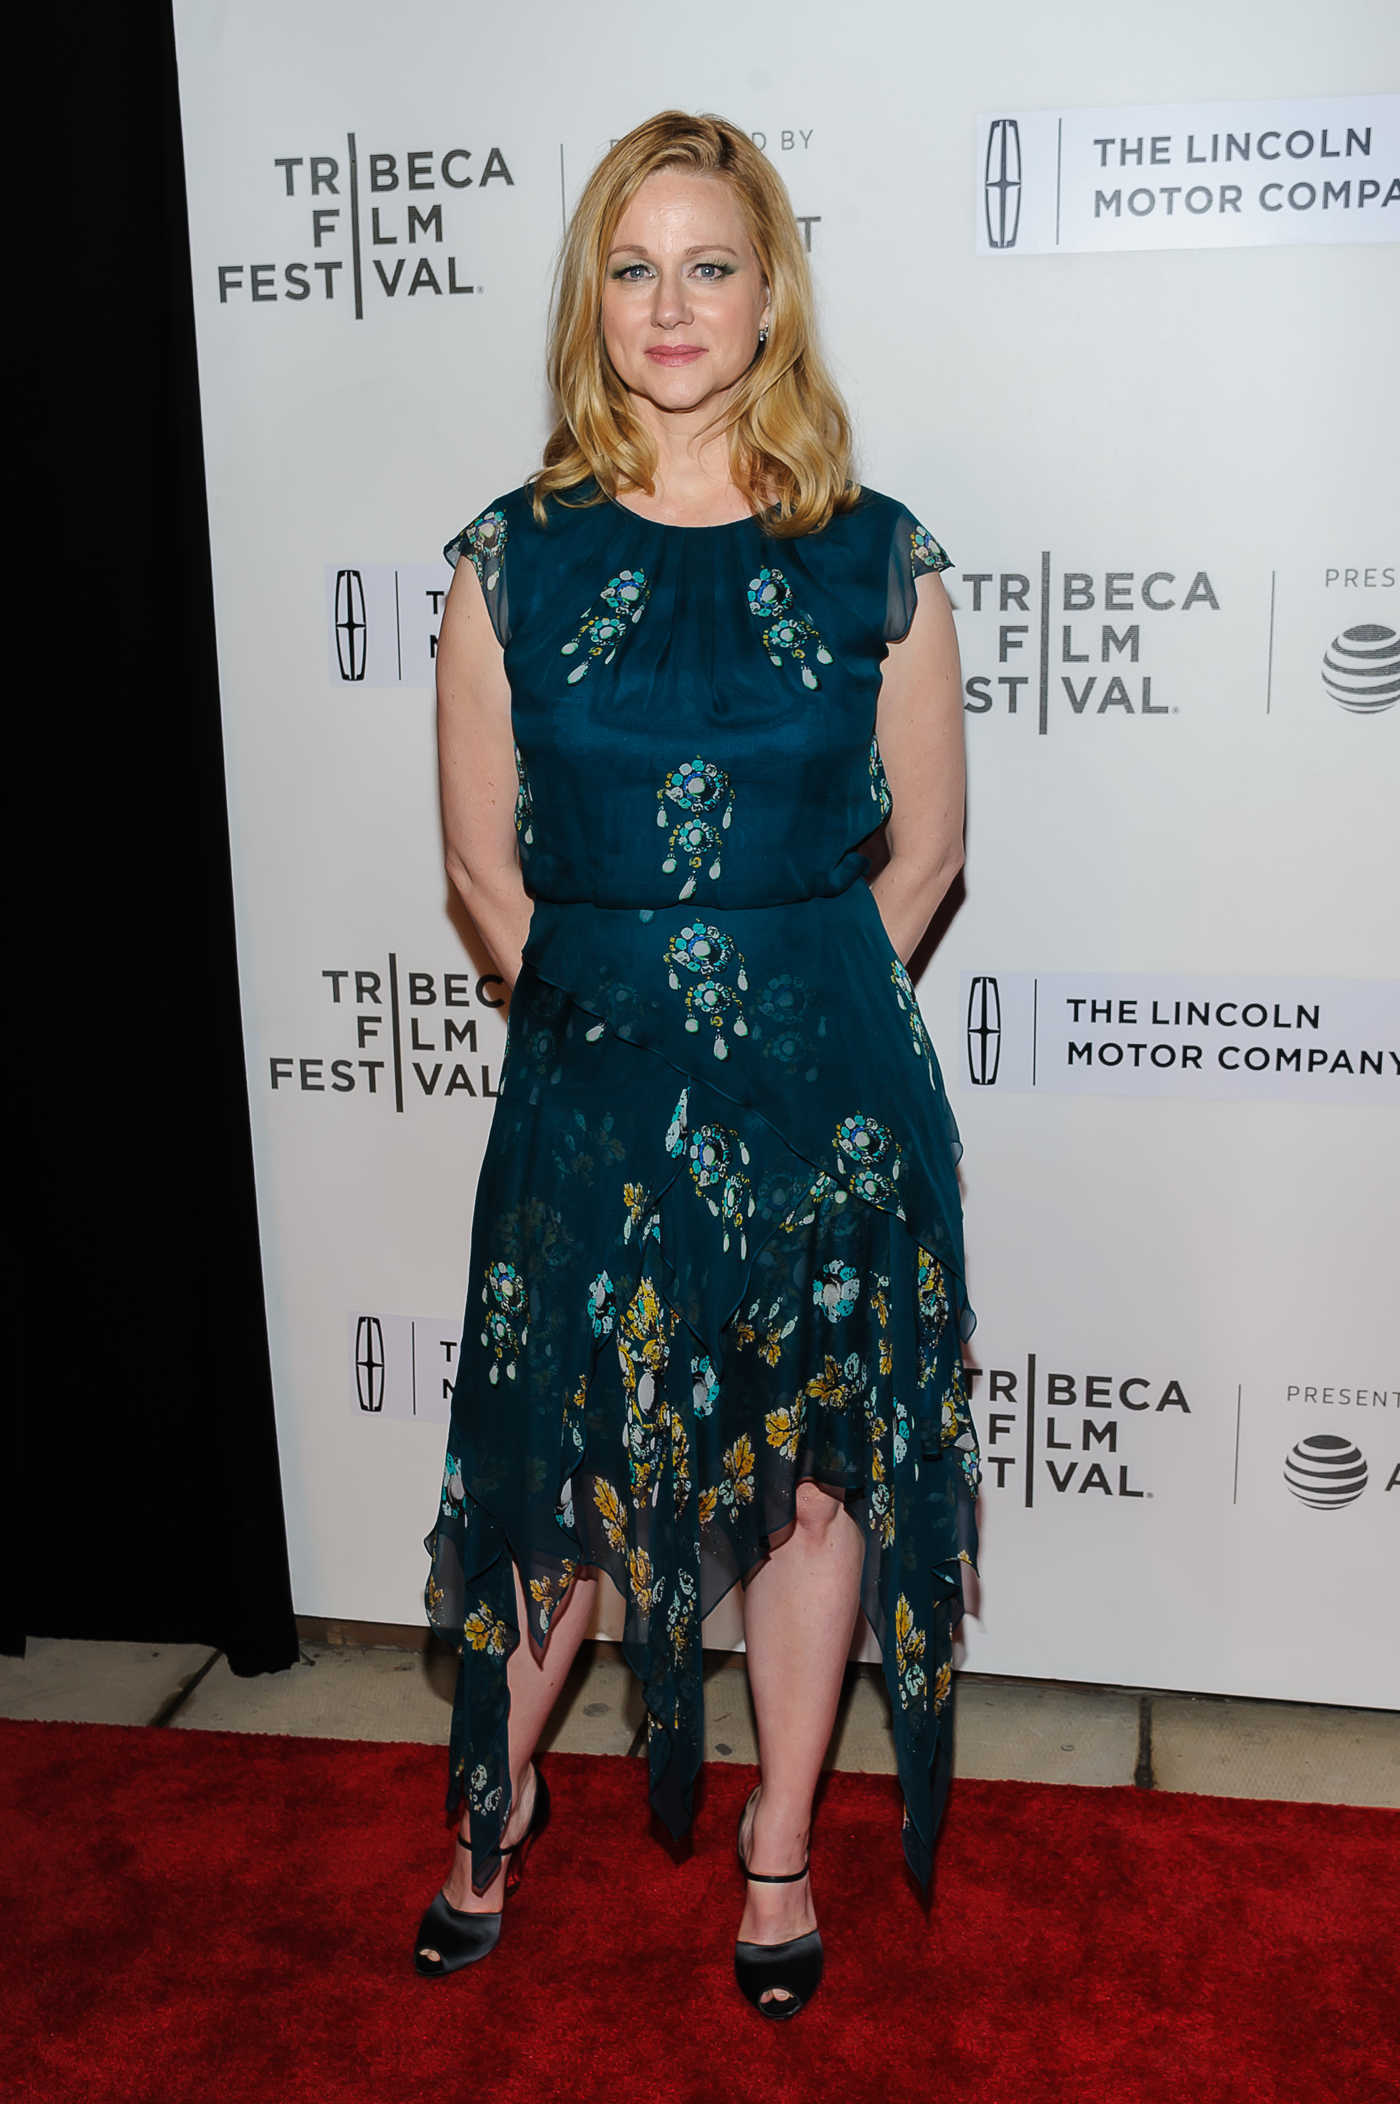 Laura Linney at The Dinner Premiere During the Tribeca Film Festival in New York 04/24/2017